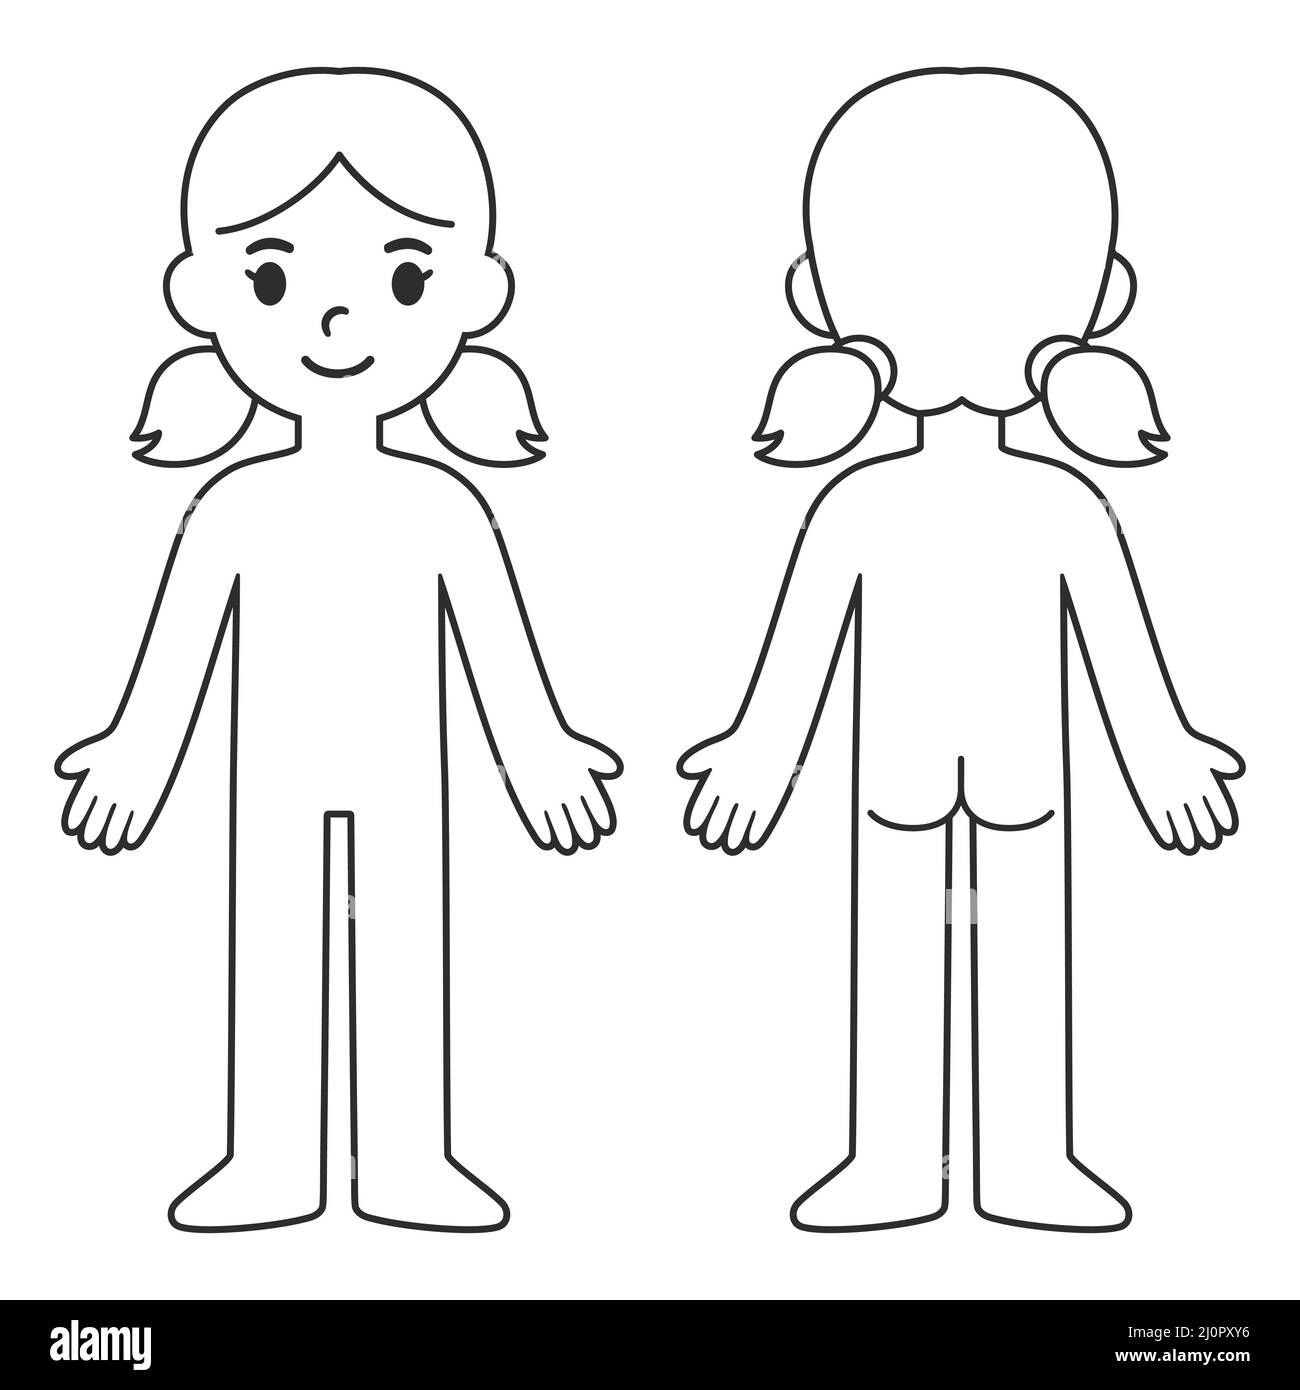 Cartoon child body chart, front and back view. Blank girl body outline template. Isolated vector illustration. Stock Vector